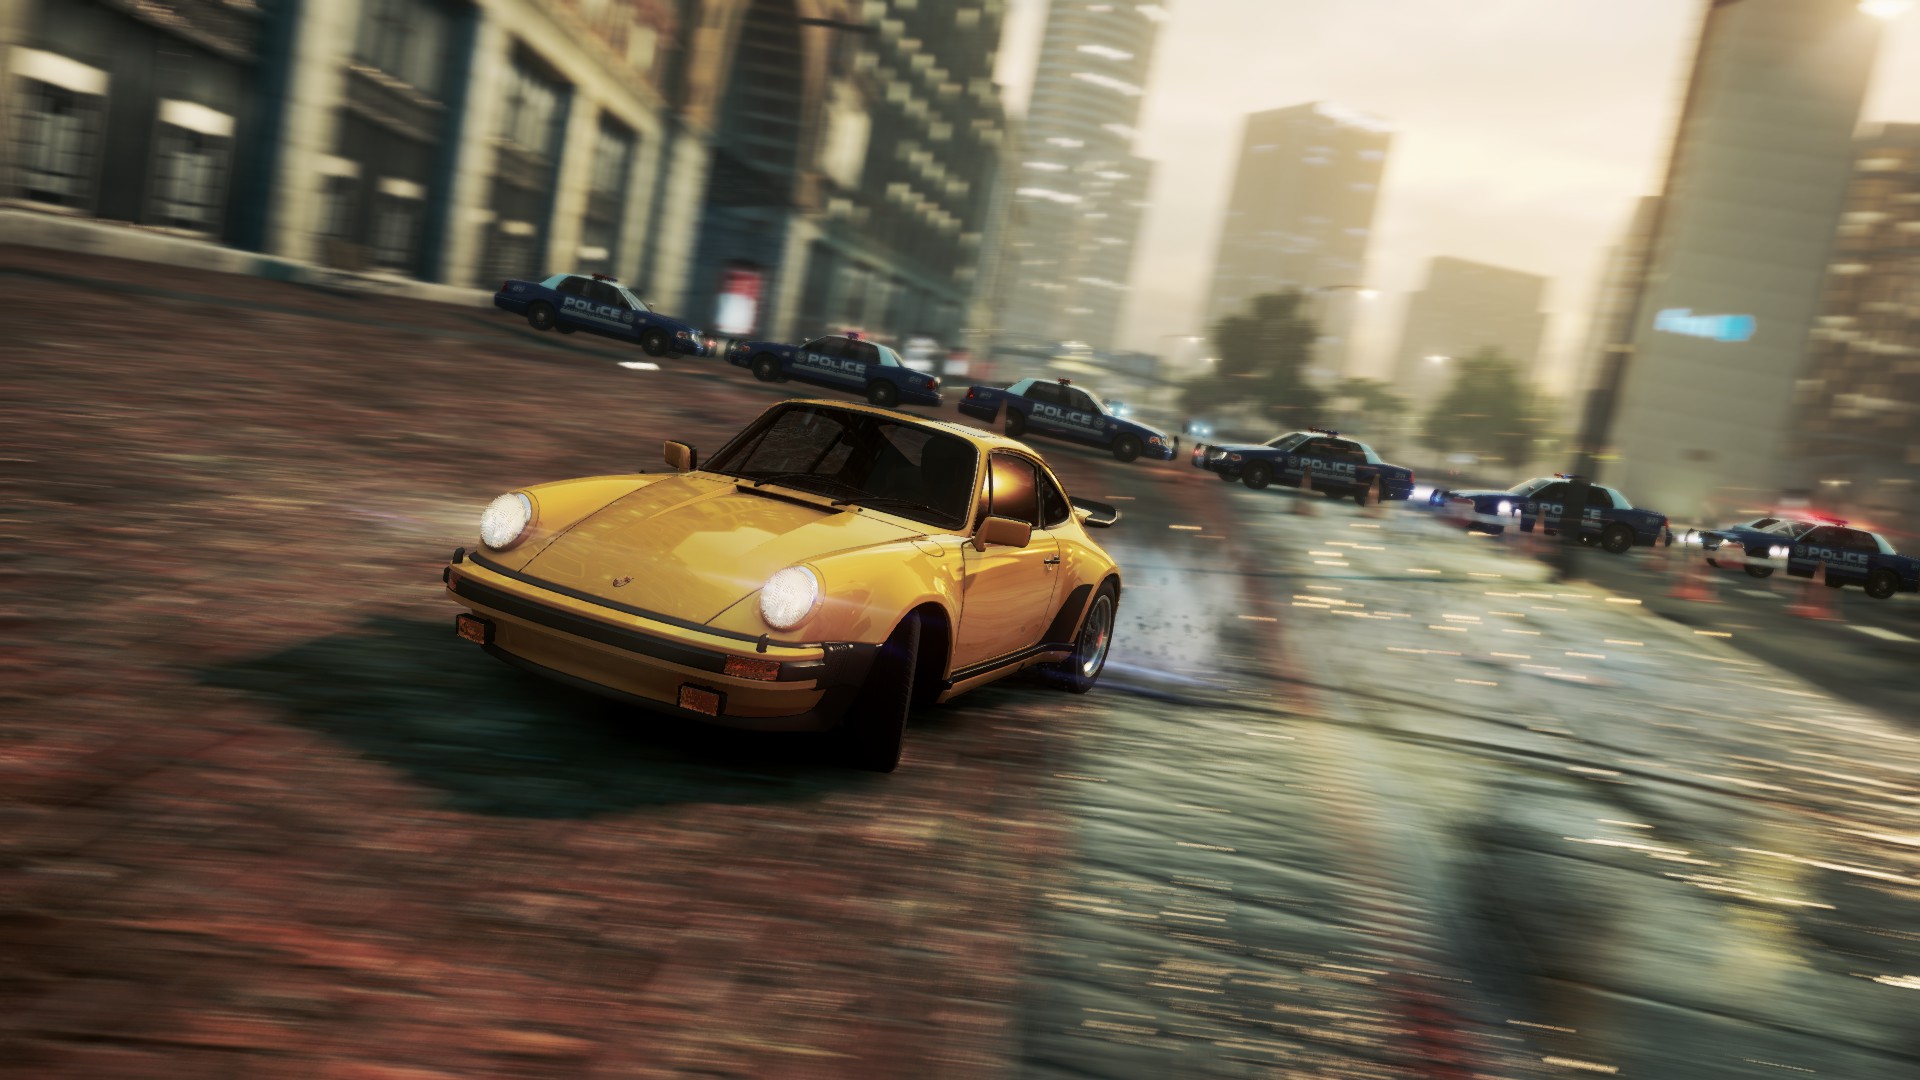 General 1920x1080 Need for Speed video games Porsche 911 Porsche German cars Volkswagen Group car Electronic Arts vehicle frontal view headlights video game art screen shot motion blur blurred police cars building